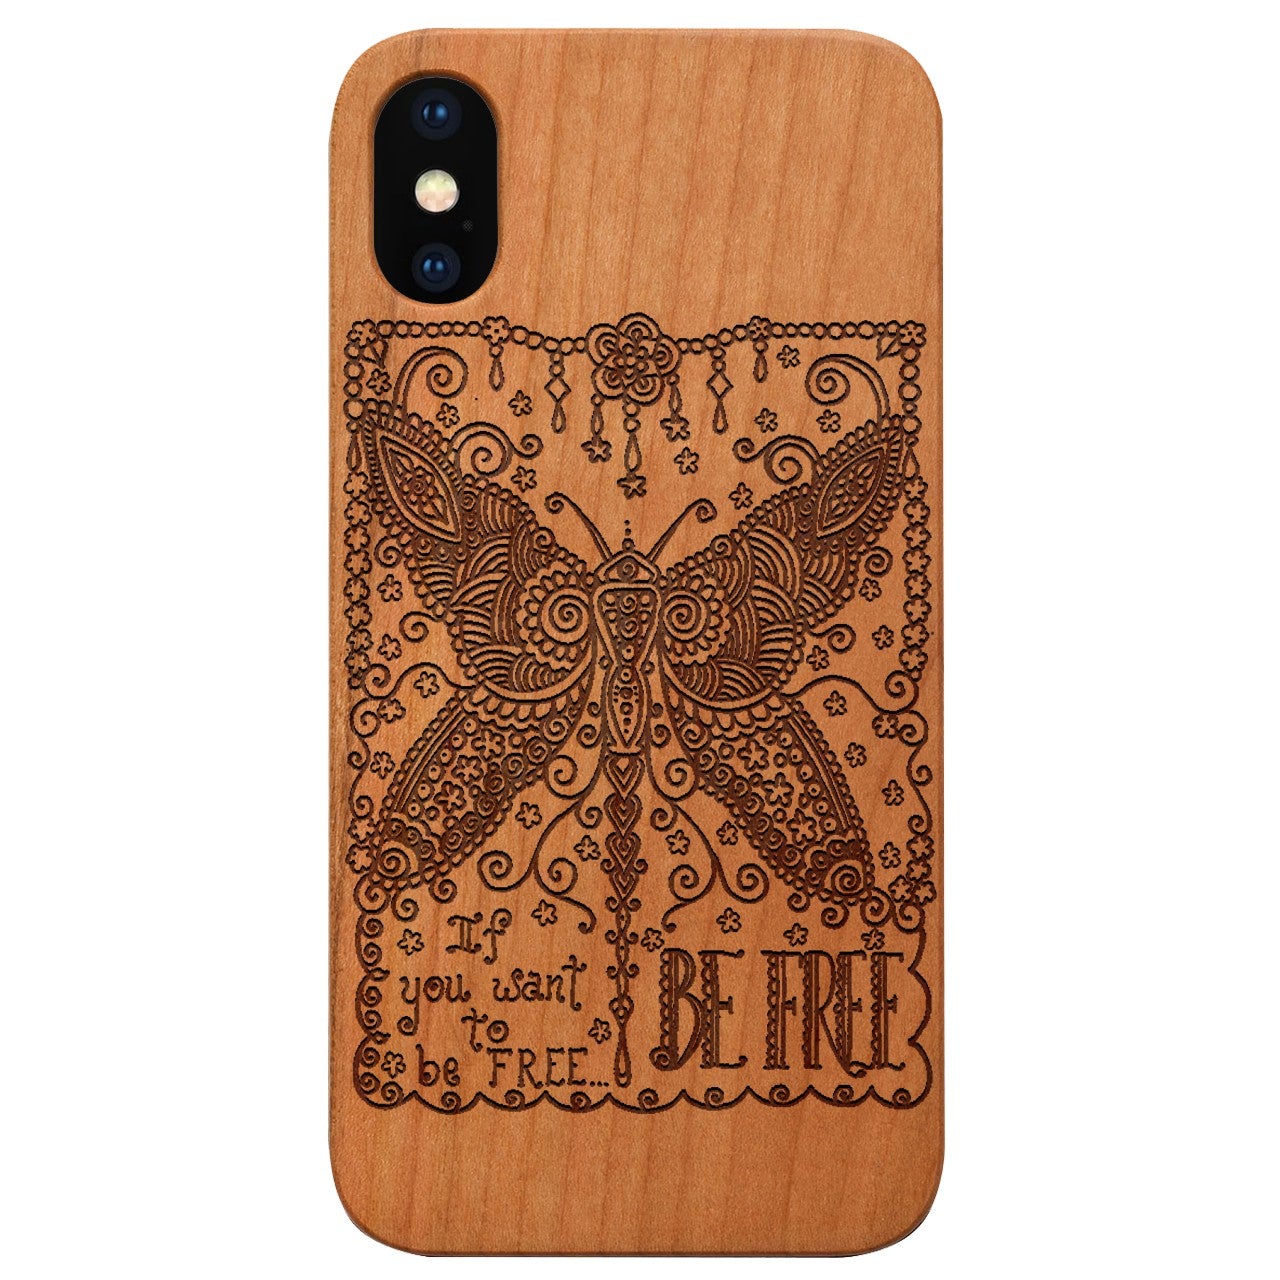  Be Free2 - Engraved - Wooden Phone Case - IPhone 13 Models